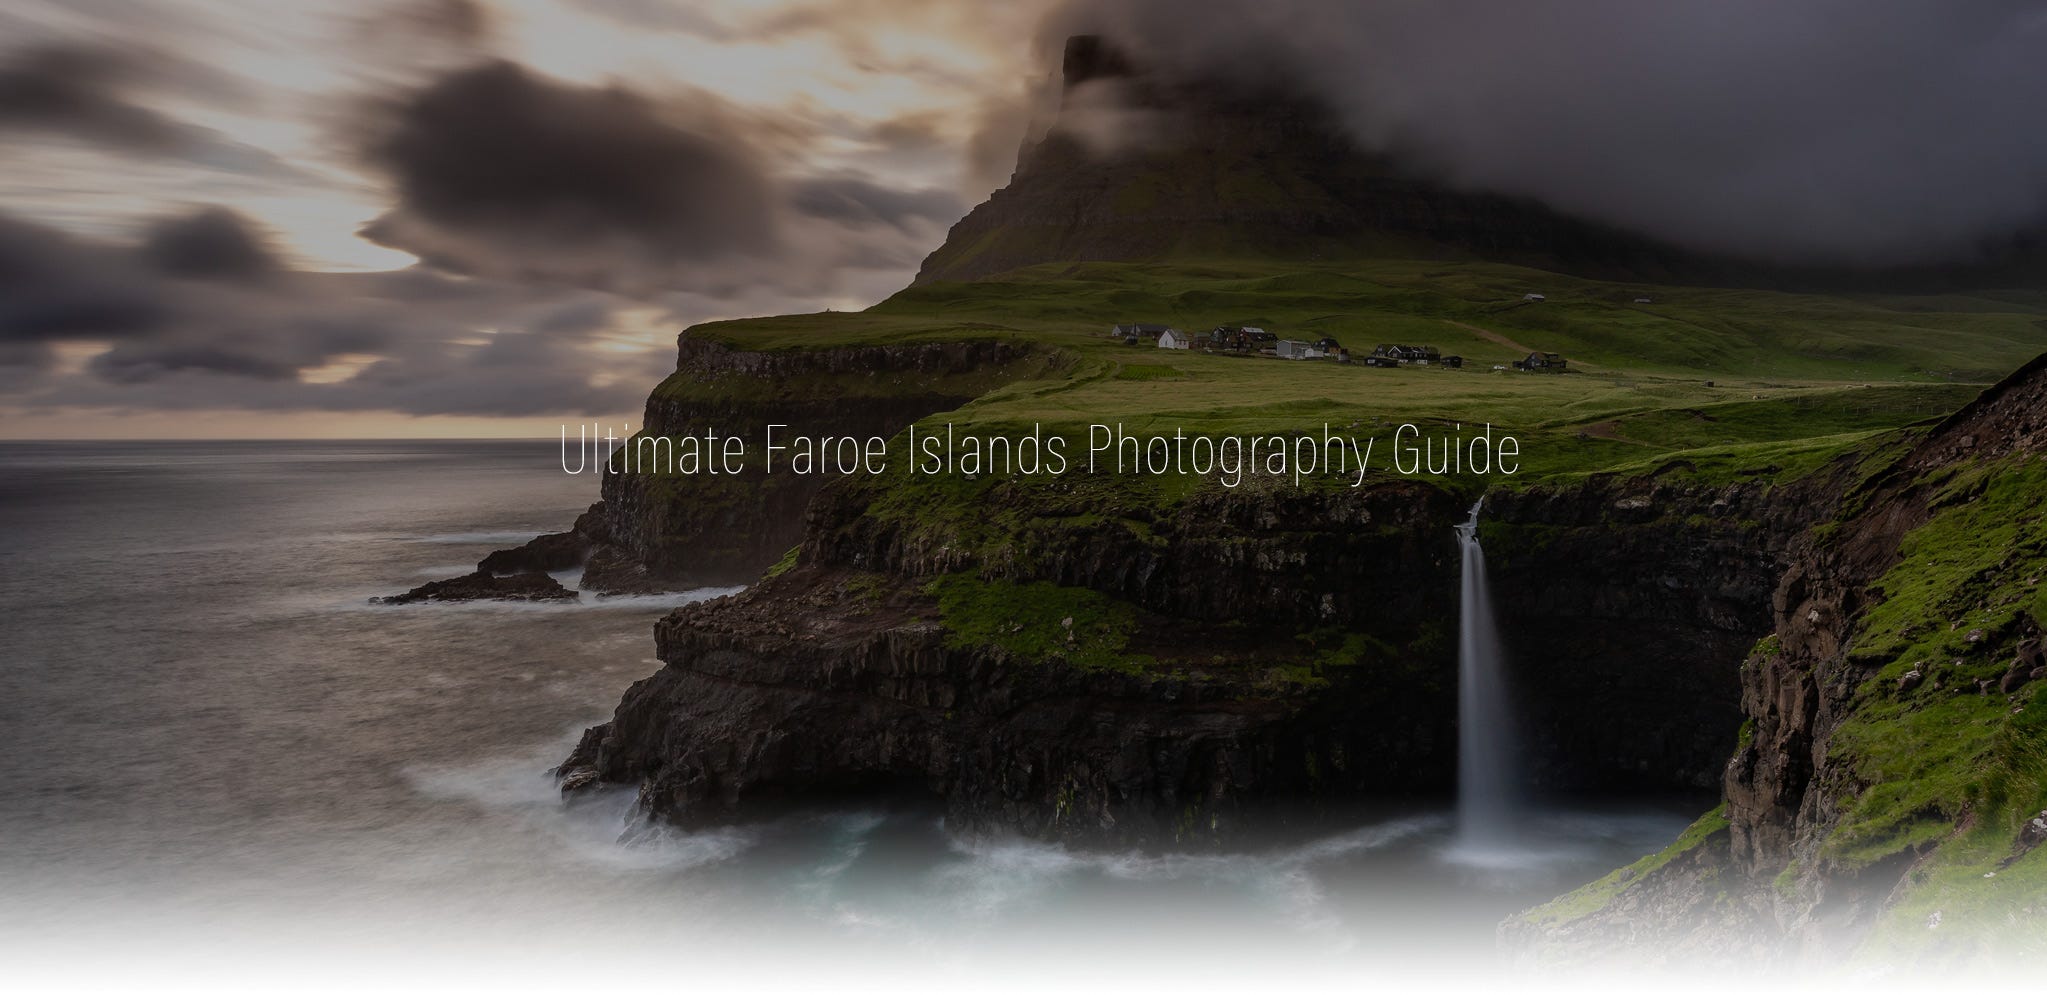 The Ultimate Faroe Islands Photography Guide | by PIXEO | Medium